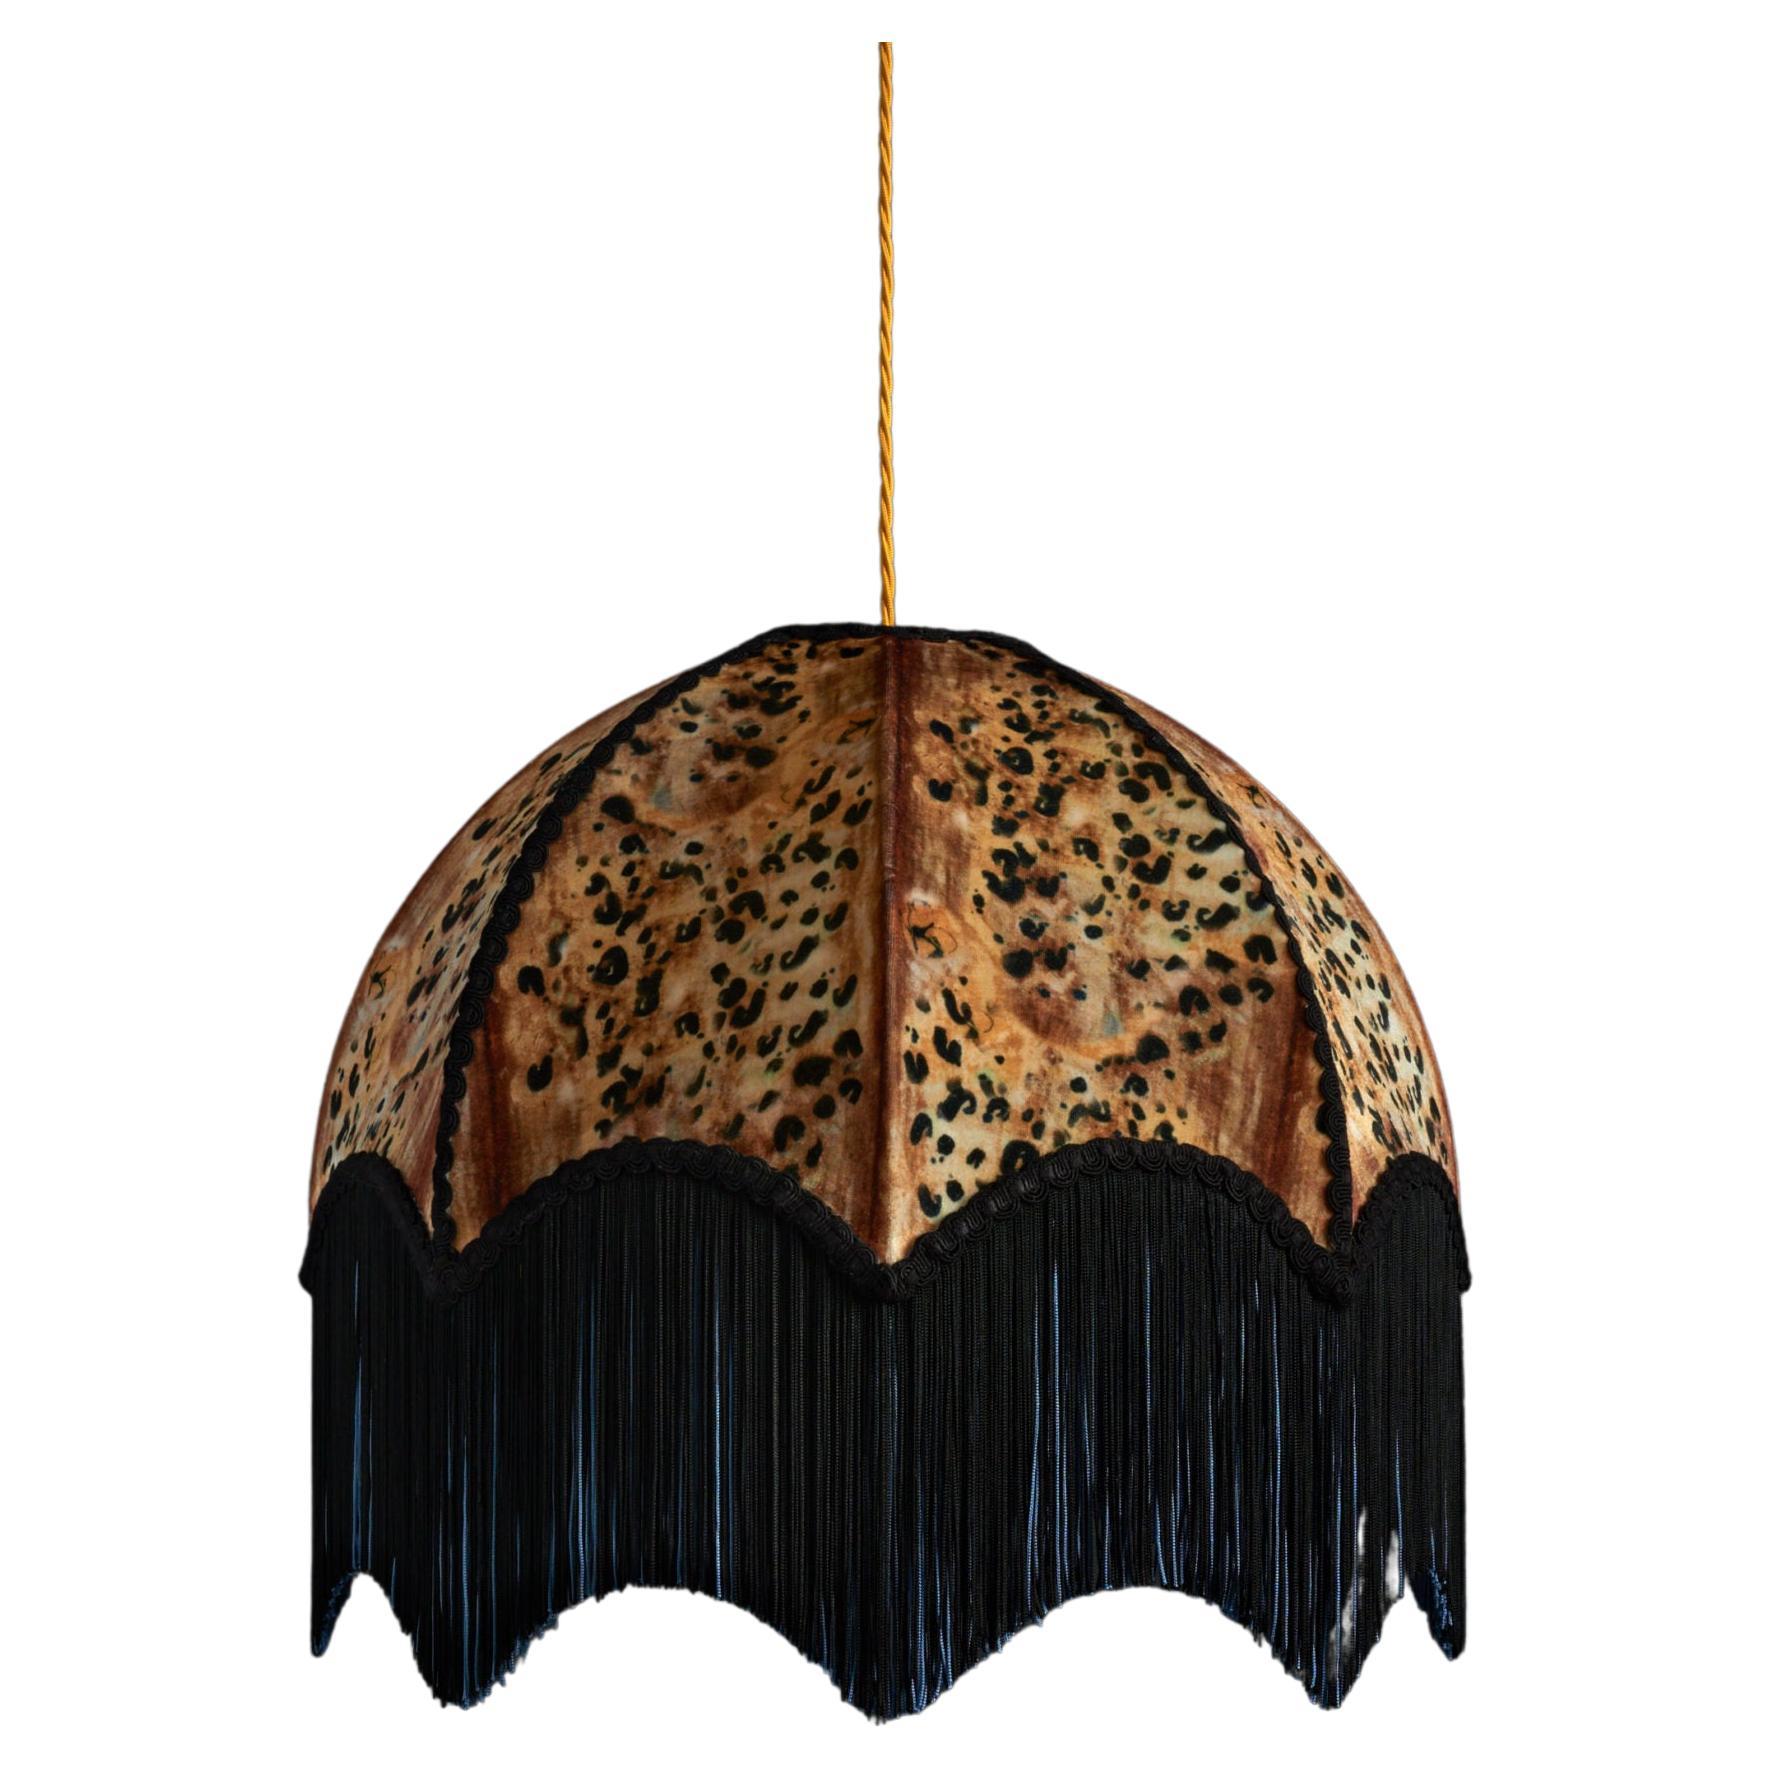 Savannah Lampshade with Fringing - Small (14") For Sale